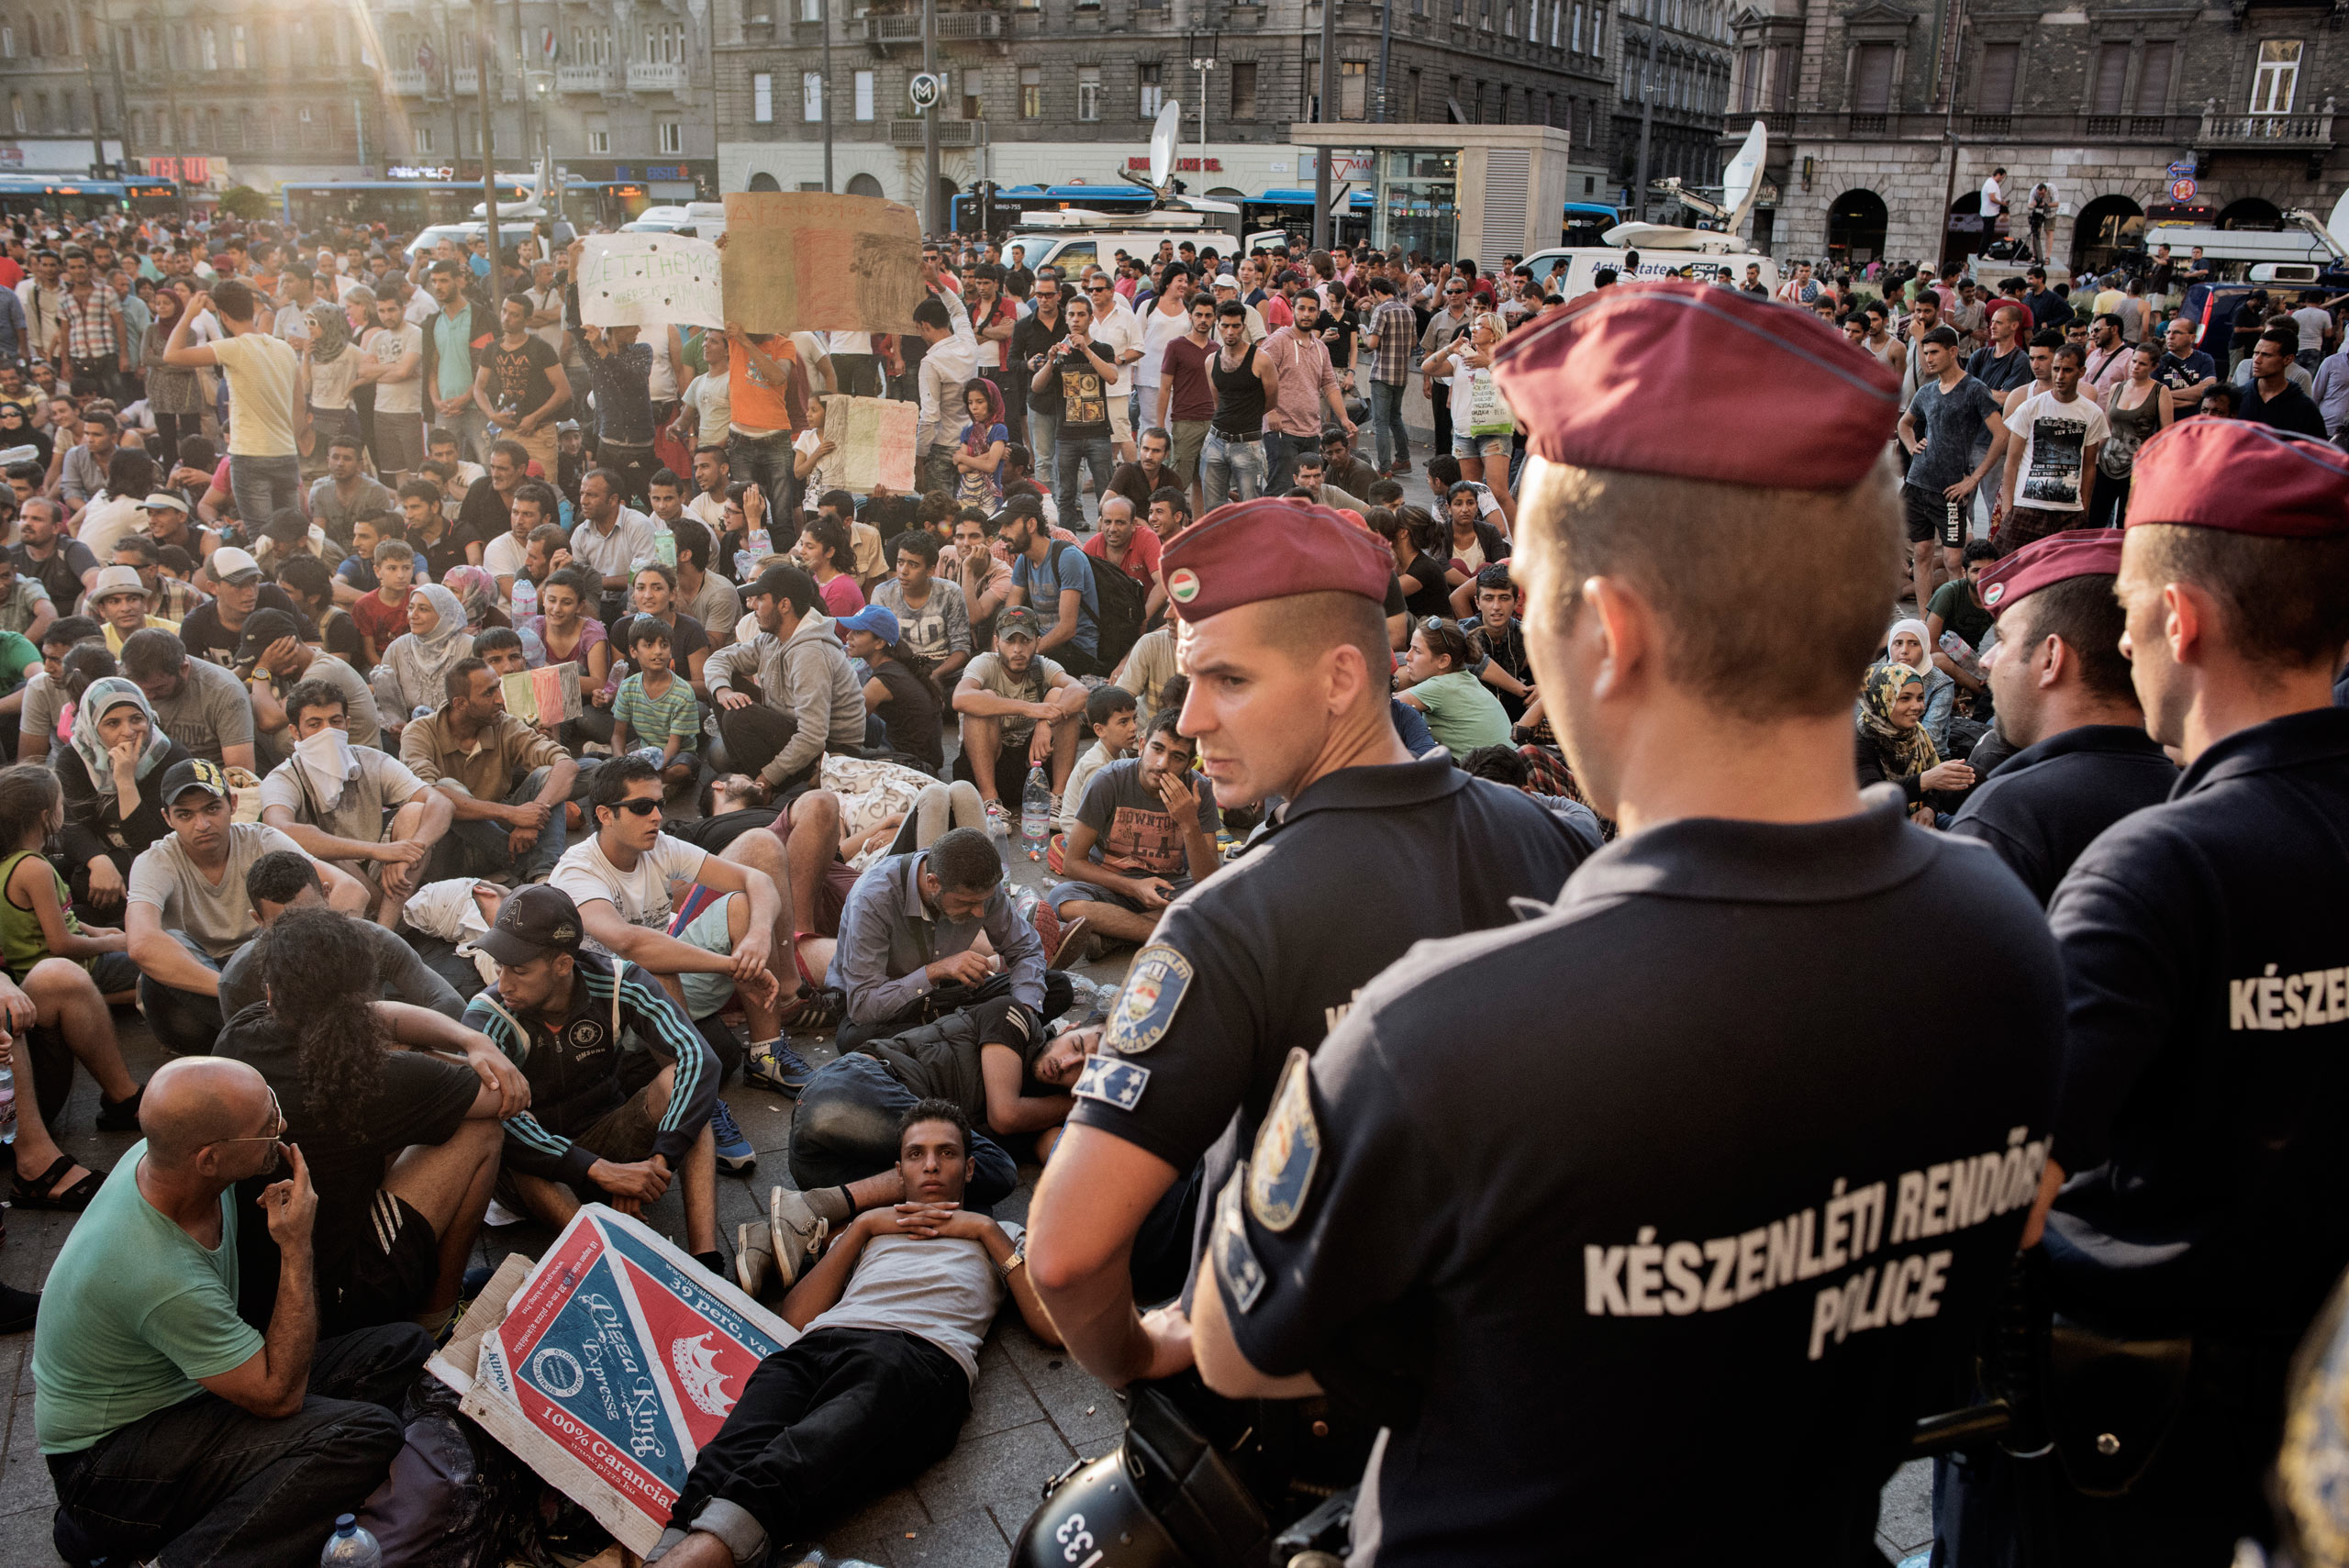 Migrants protest for the right to travel to Germany and claim asylum at the Keleti train station in Budapest which was temporarily closed. Sept. 1, 2015. (Yuri Kozyrev—NOOR for TIME)